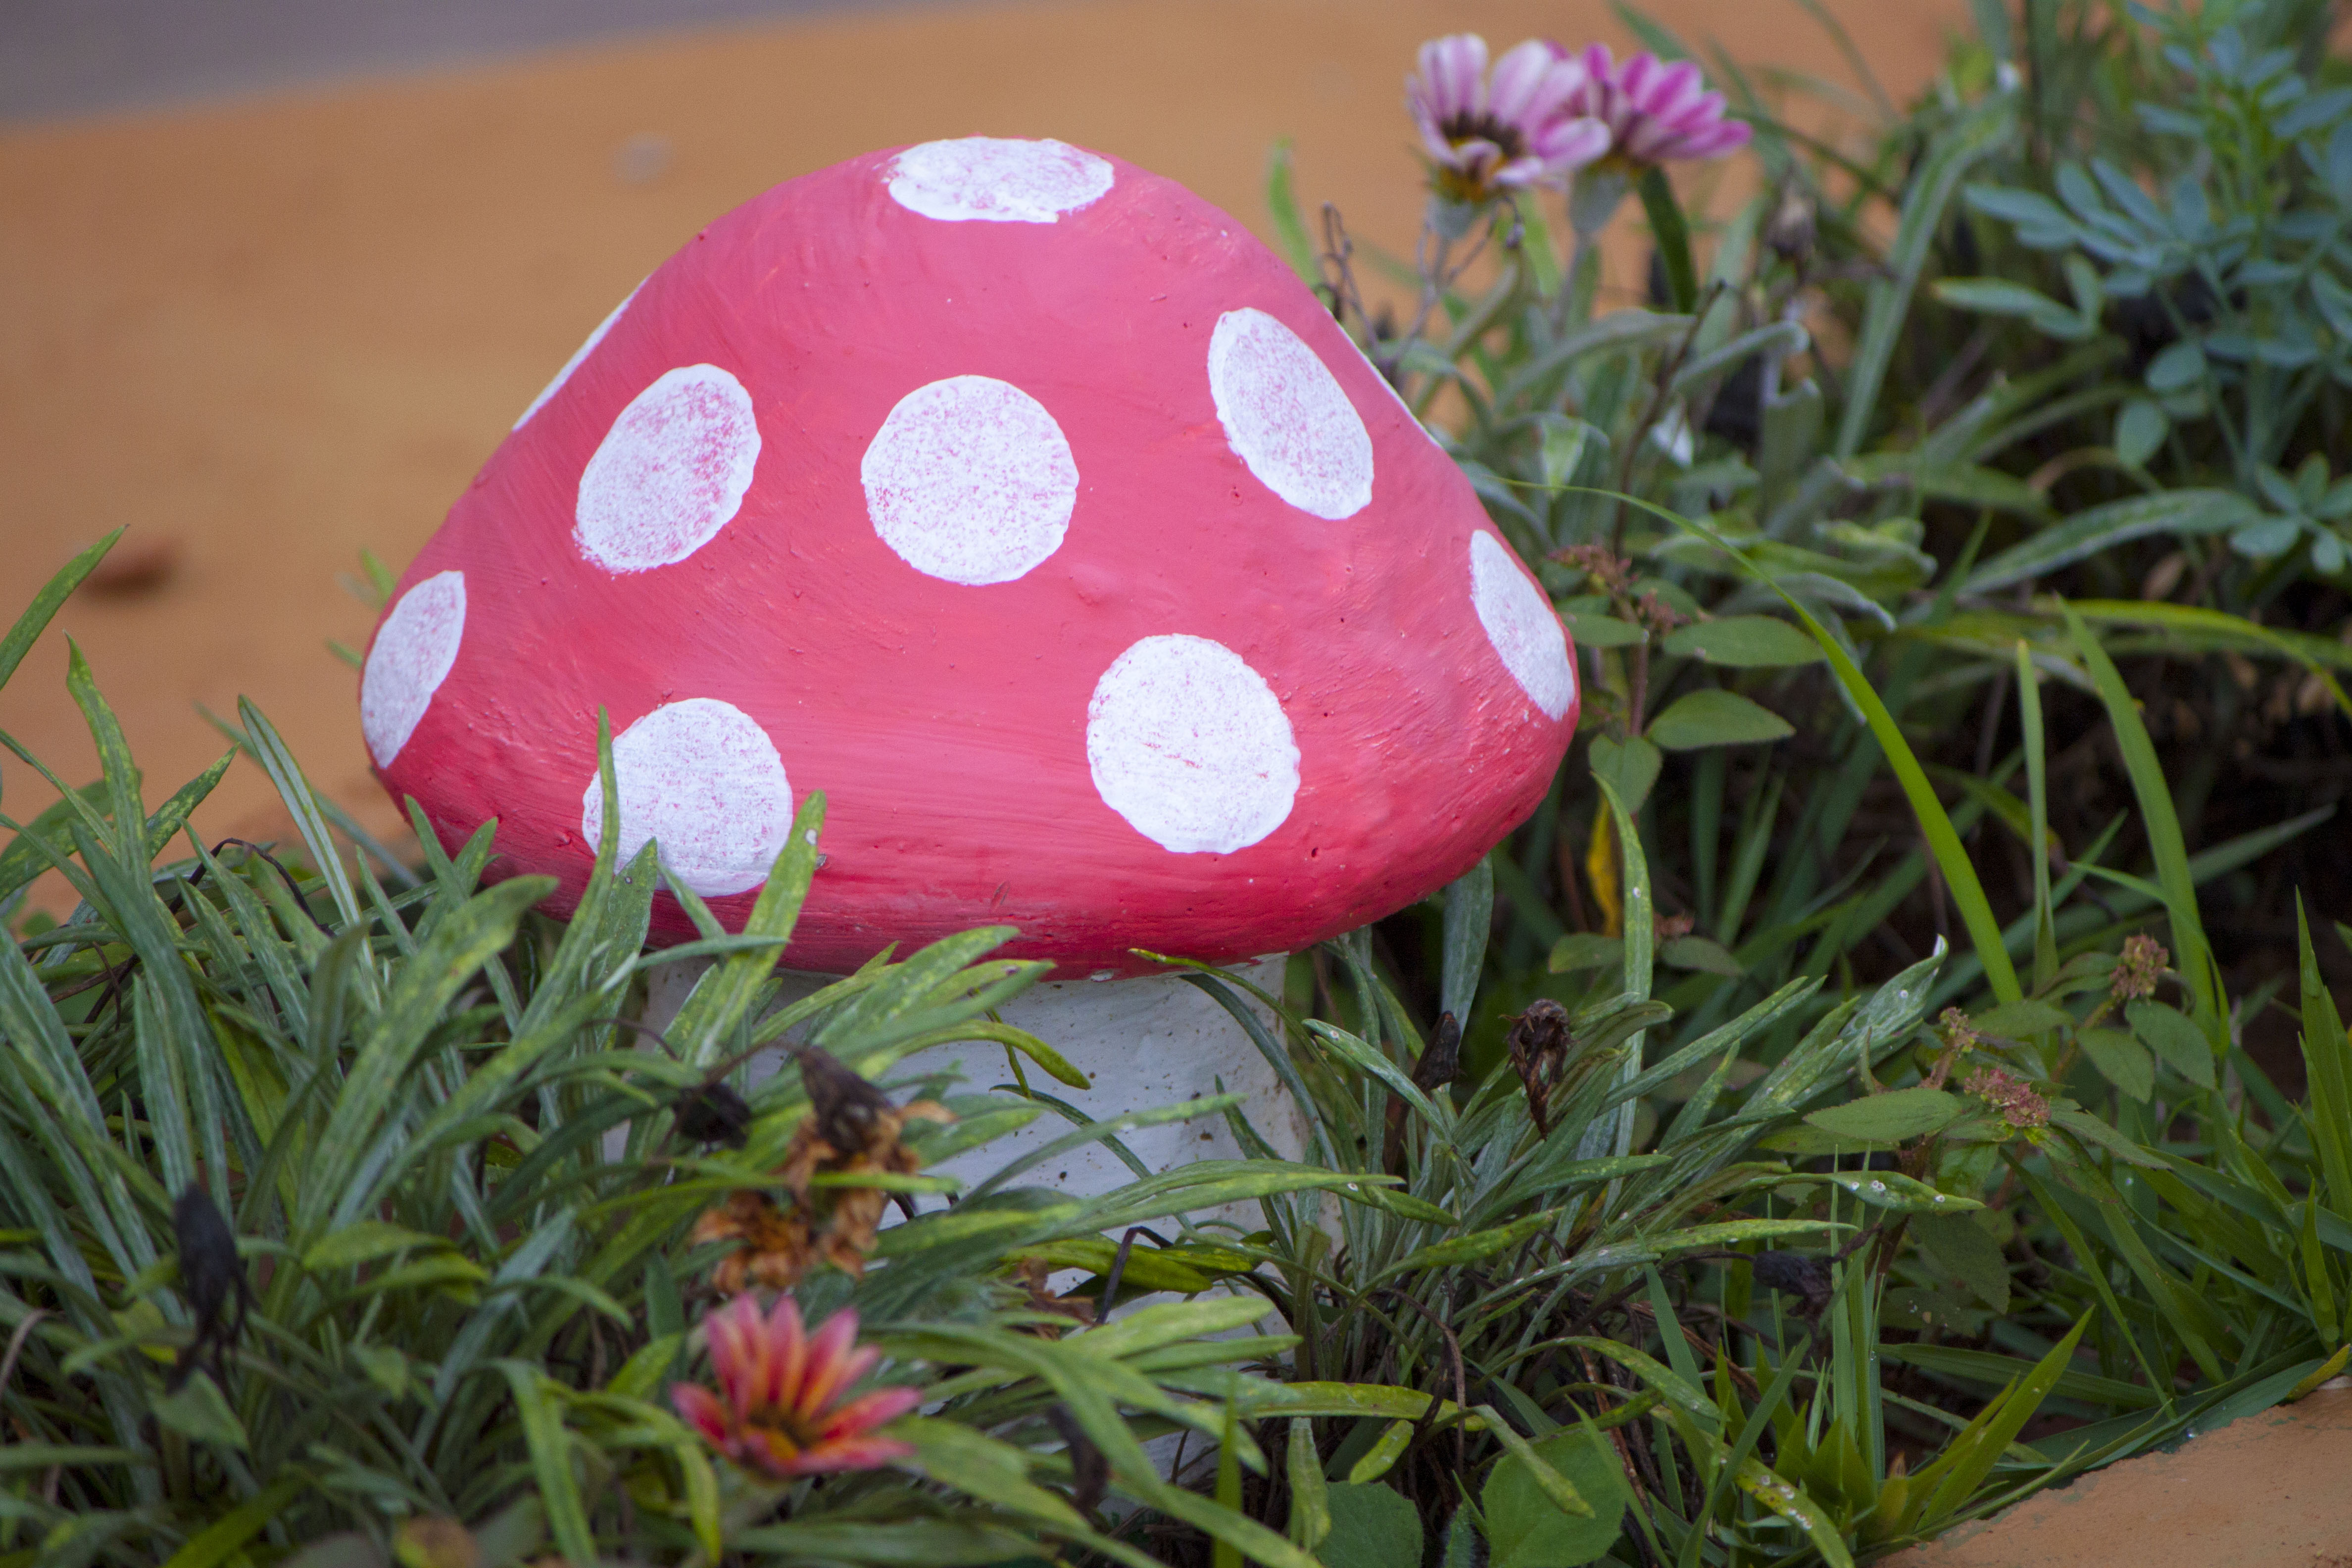 Garden mushroom surrounded by plants photo